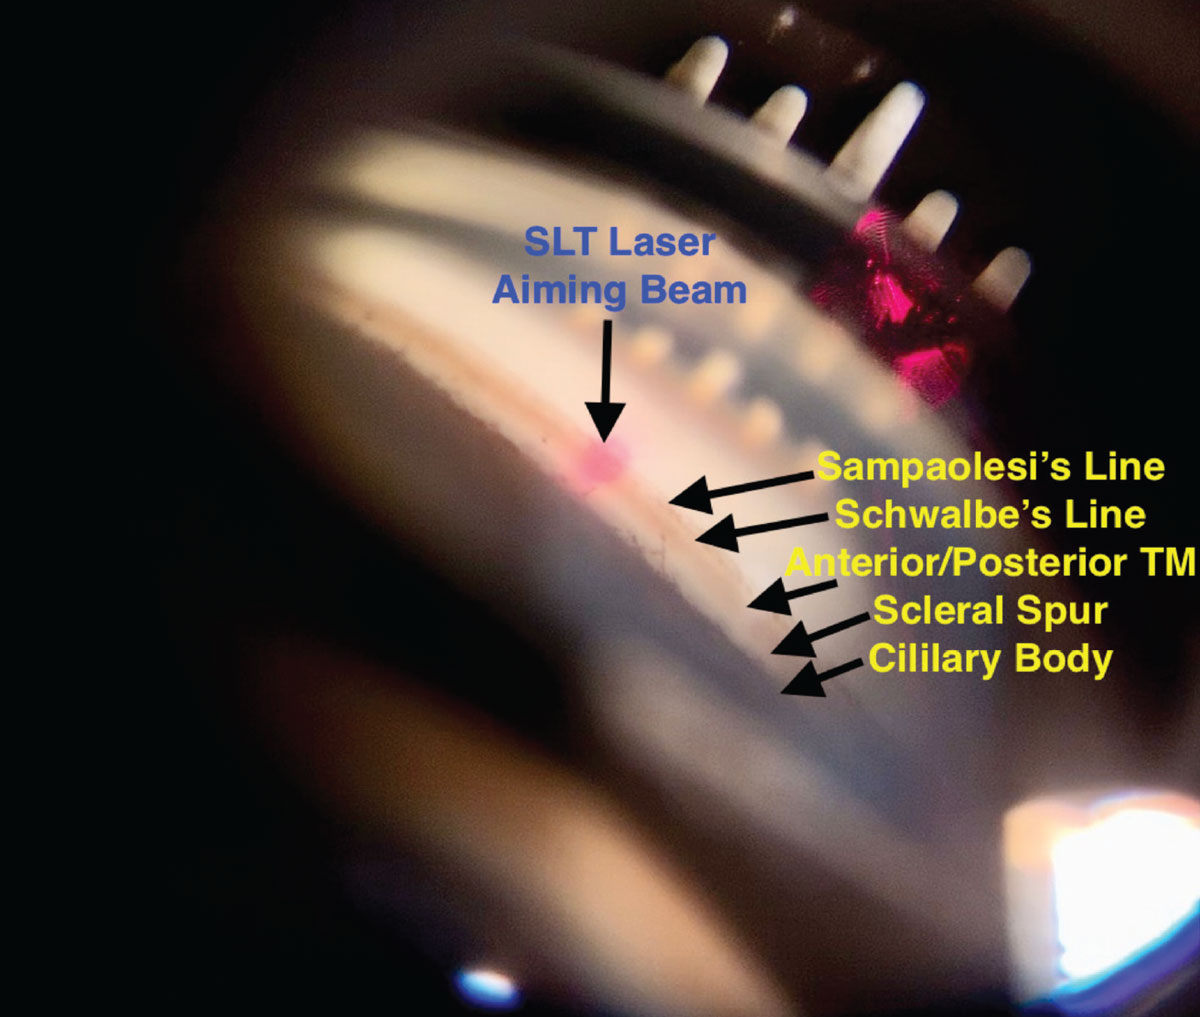 Fig. 4. A view of the angle of an eye through an SLT gonio lens, with the aiming beam focused on the trabecular meshwork.